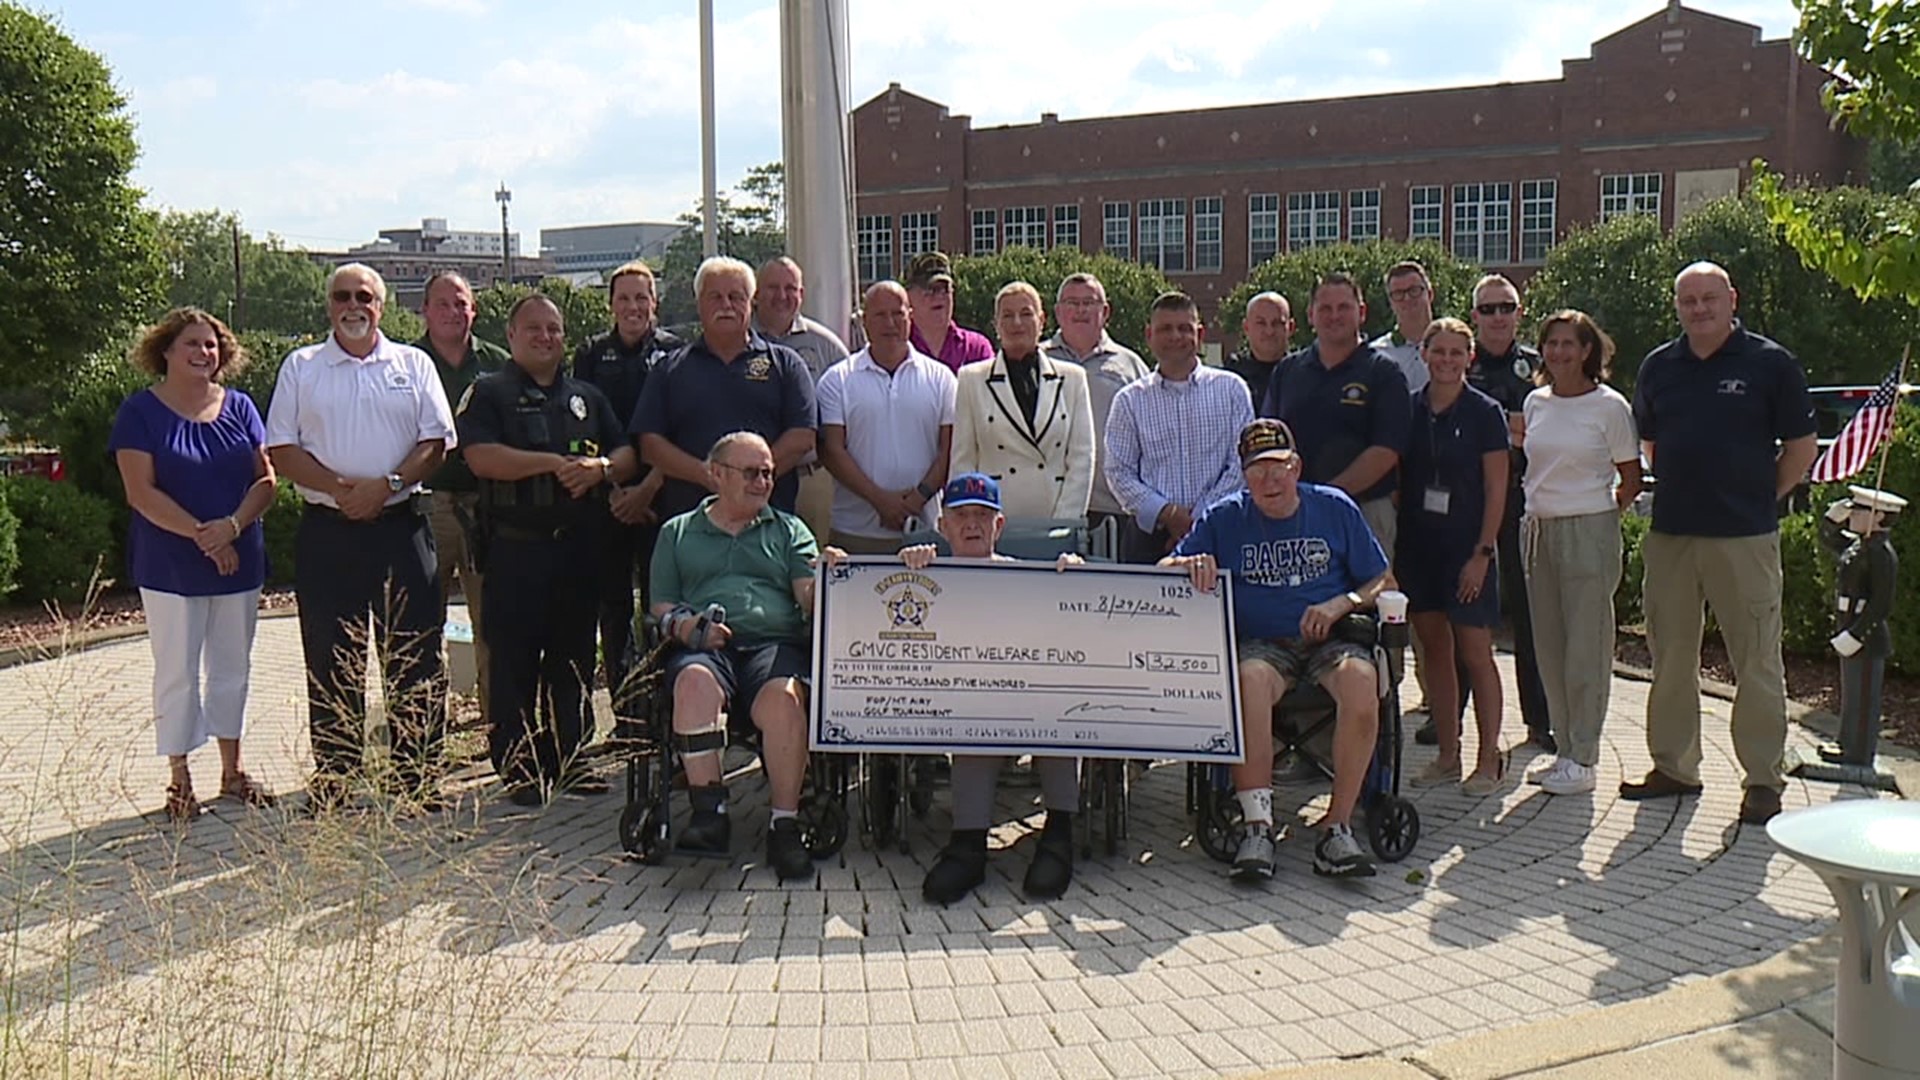 The Fraternal Order of Police Scranton/Dunmore Chapter presented a check for $32,500 to the Gino Merli Veterans Center.